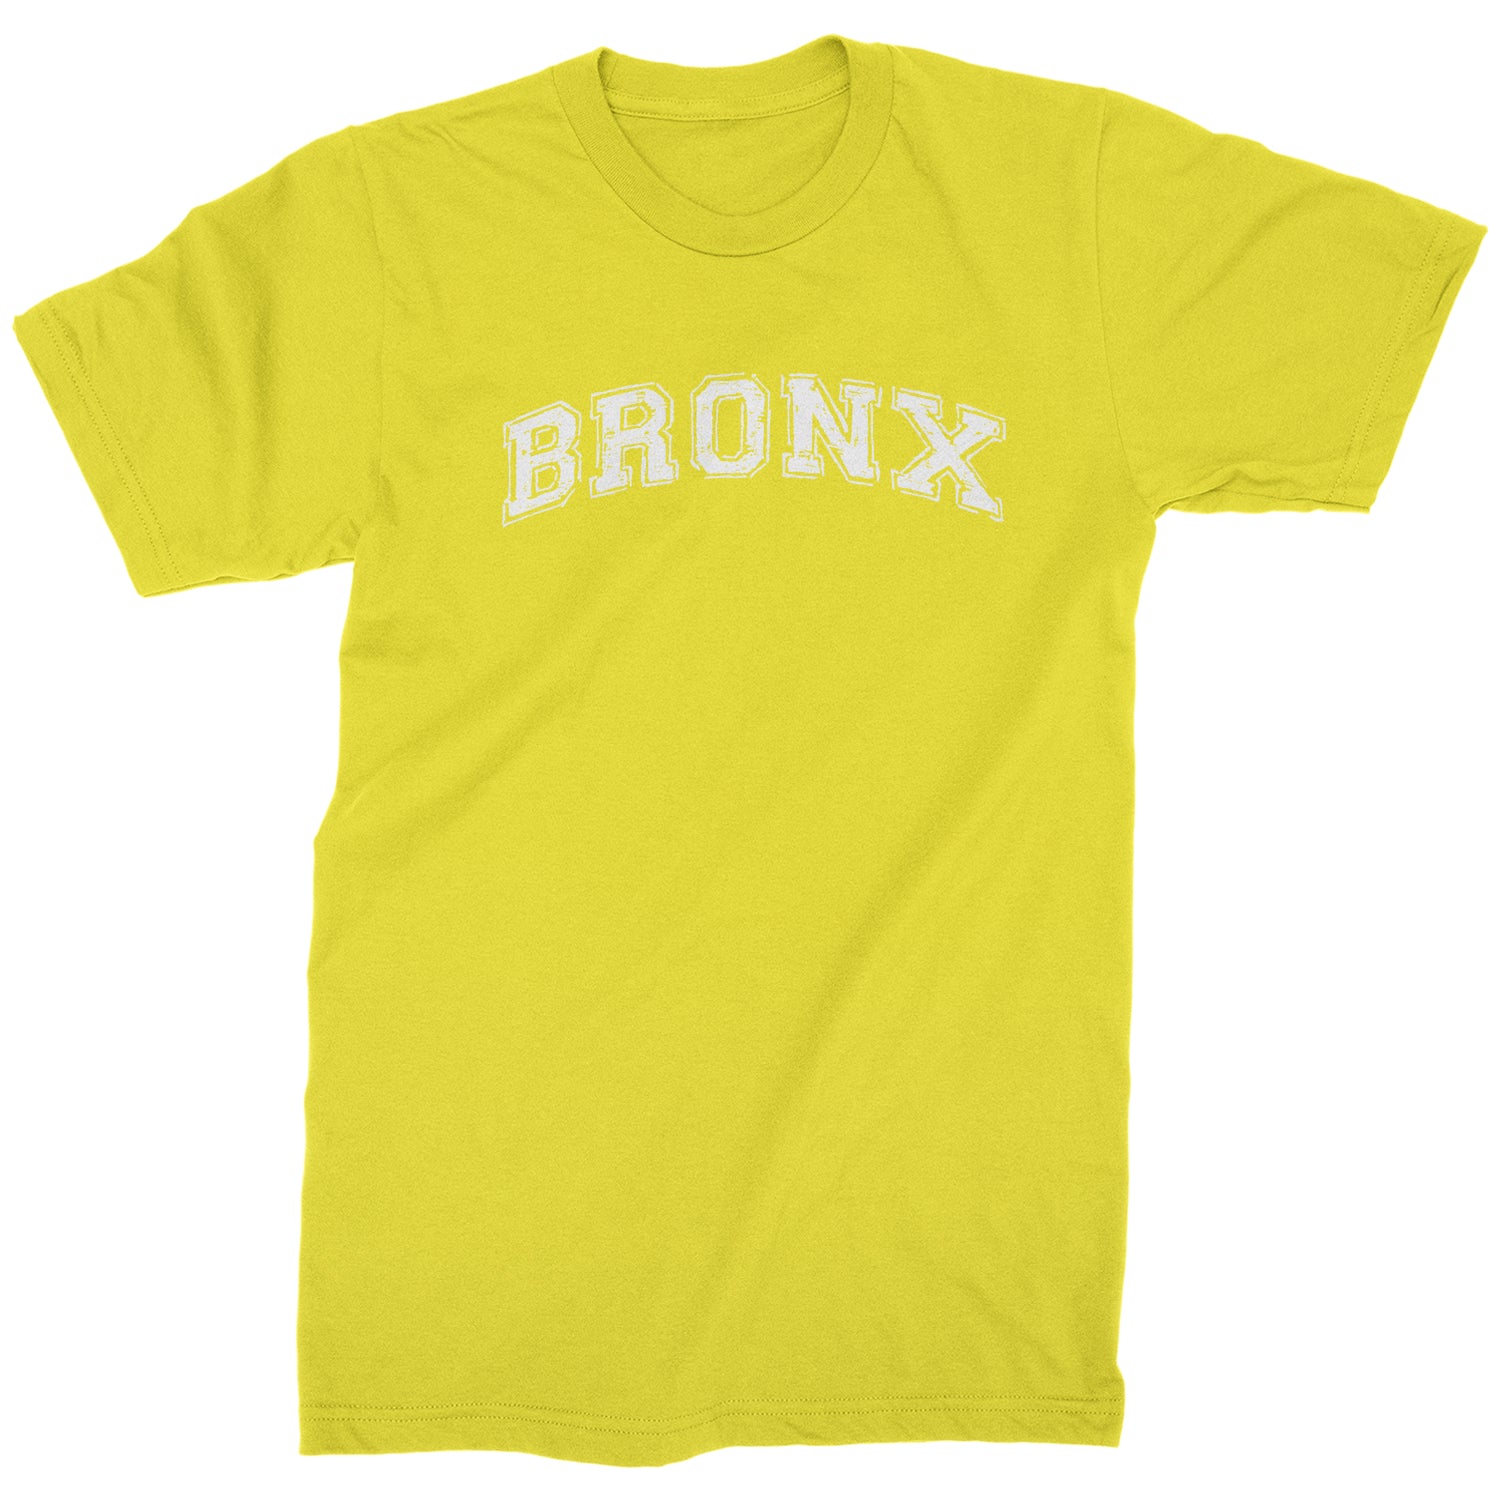 Bronx - From The Block Mens T-shirt b, cardi, concert, its, Jennifer, lopez, merch, my, party, tour by Expression Tees